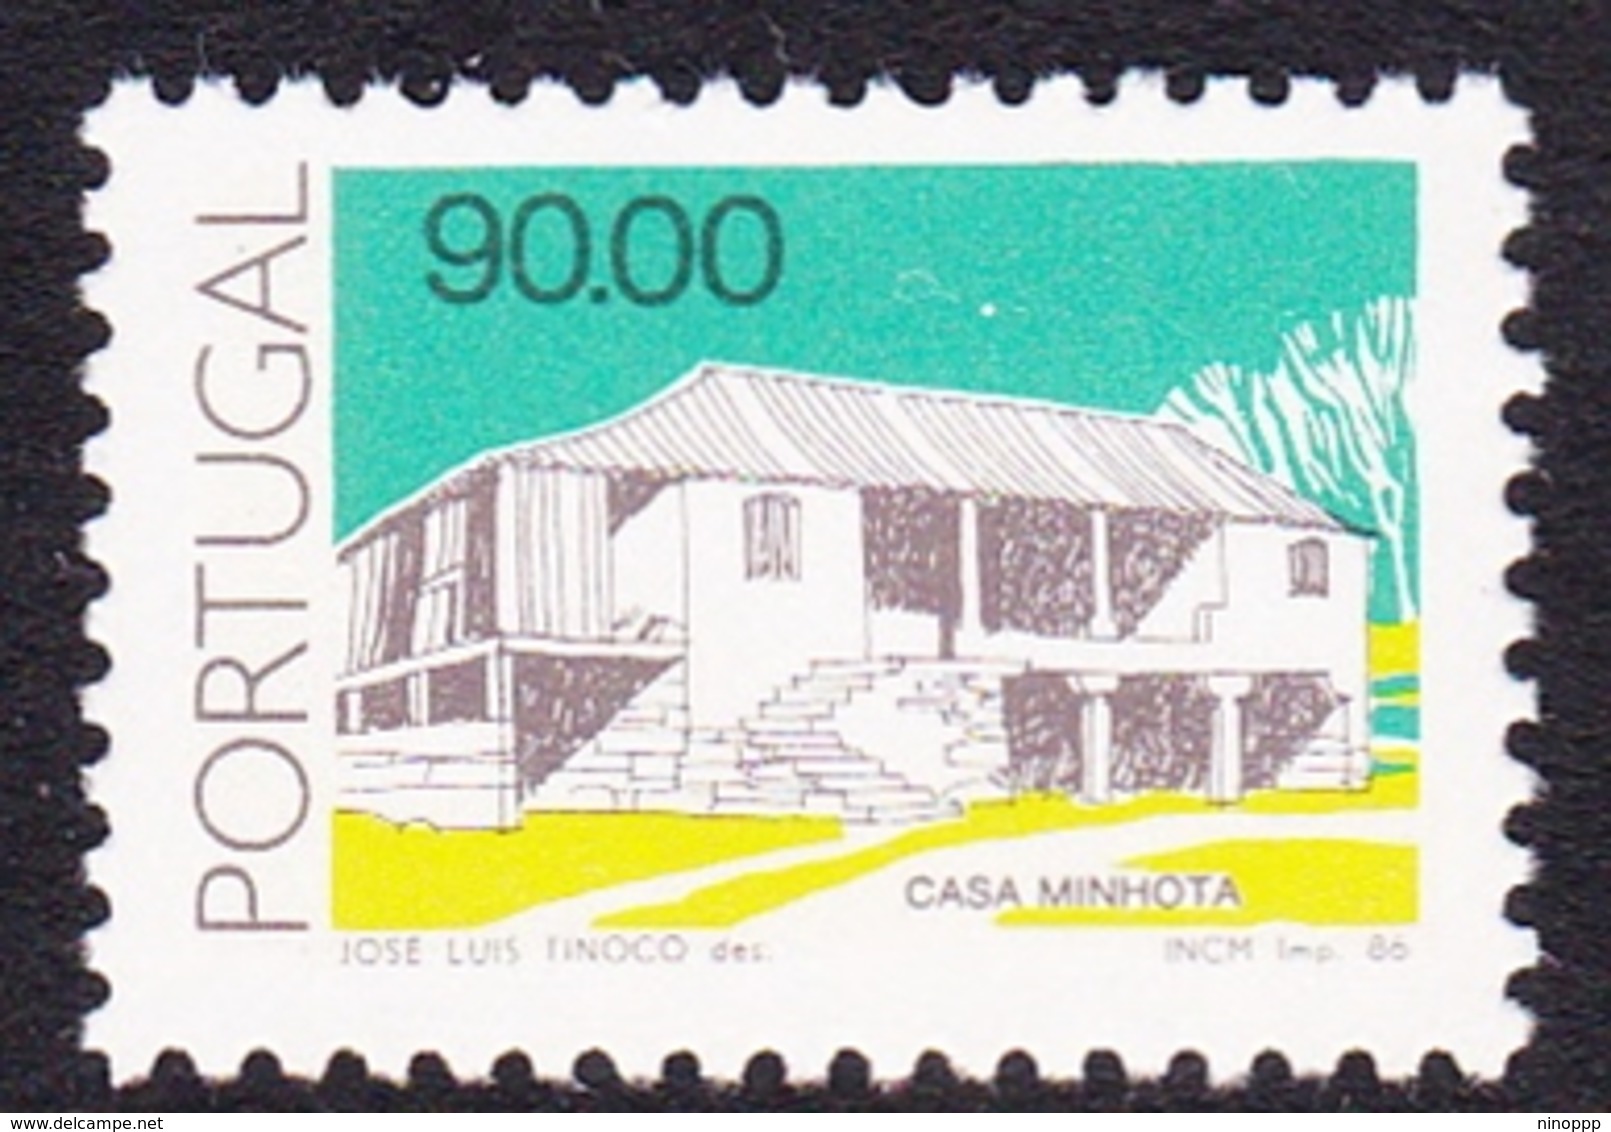 Portugal SG 2015 1985-86 Architecture, 90e, Mint Never Hinged - Nuevos